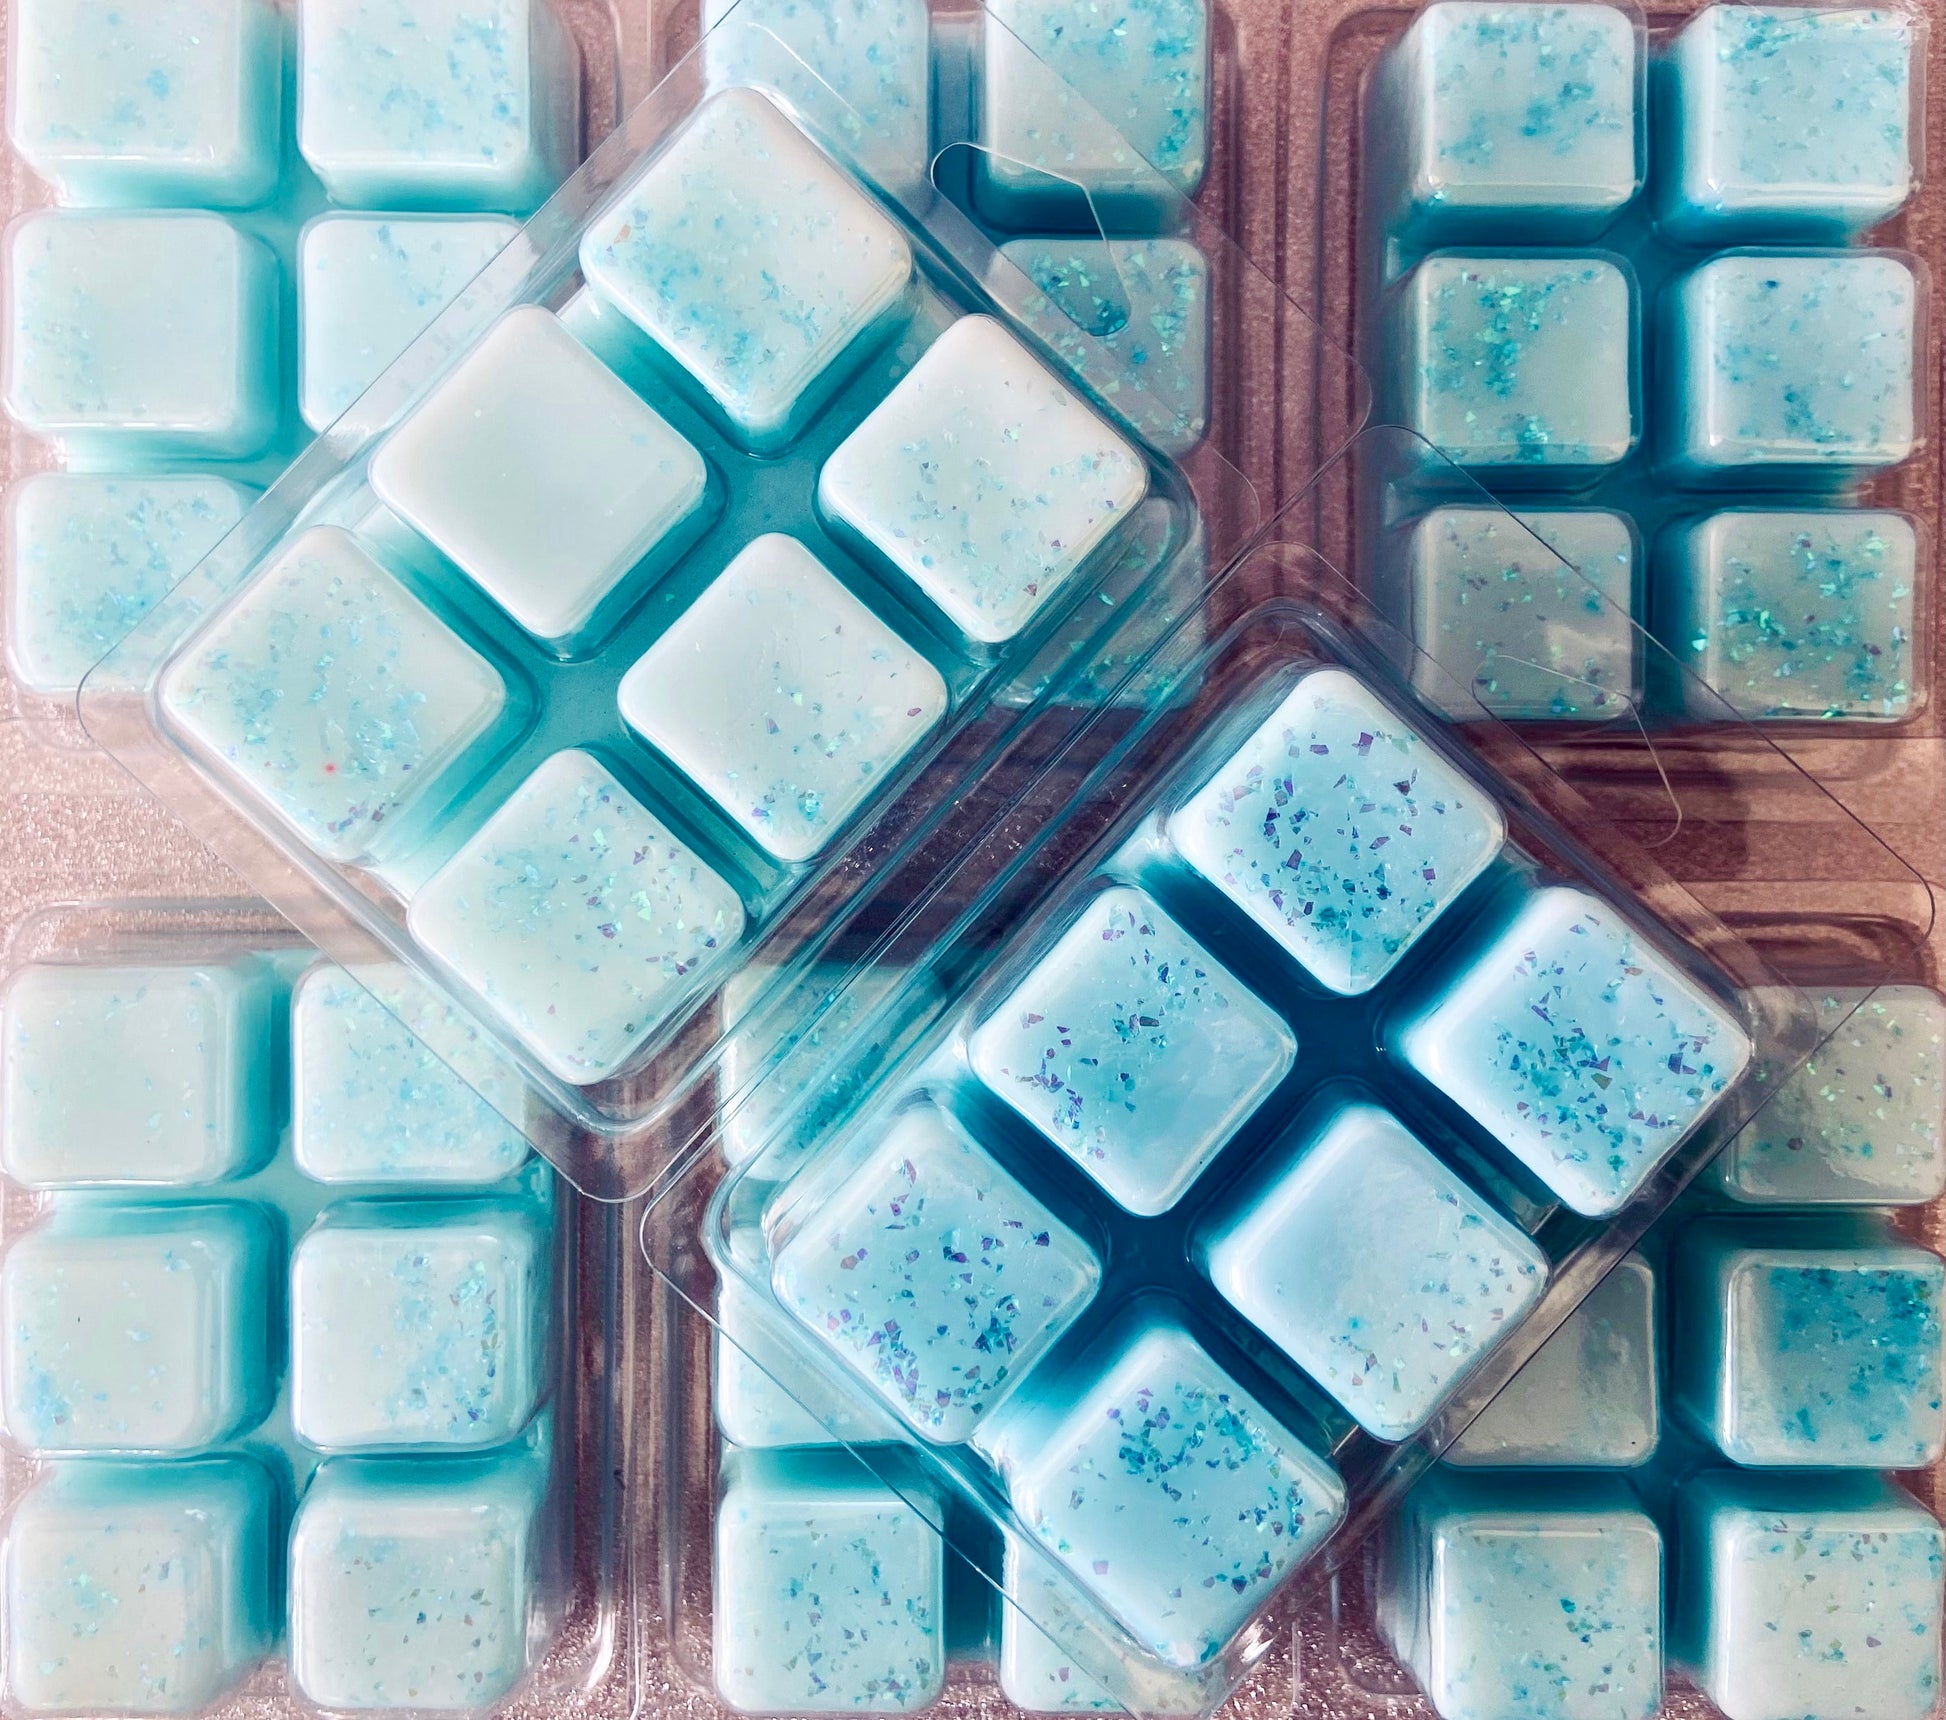 Assorted blue Invictus soy wax melts in clear plastic packaging by The Soap Gals.